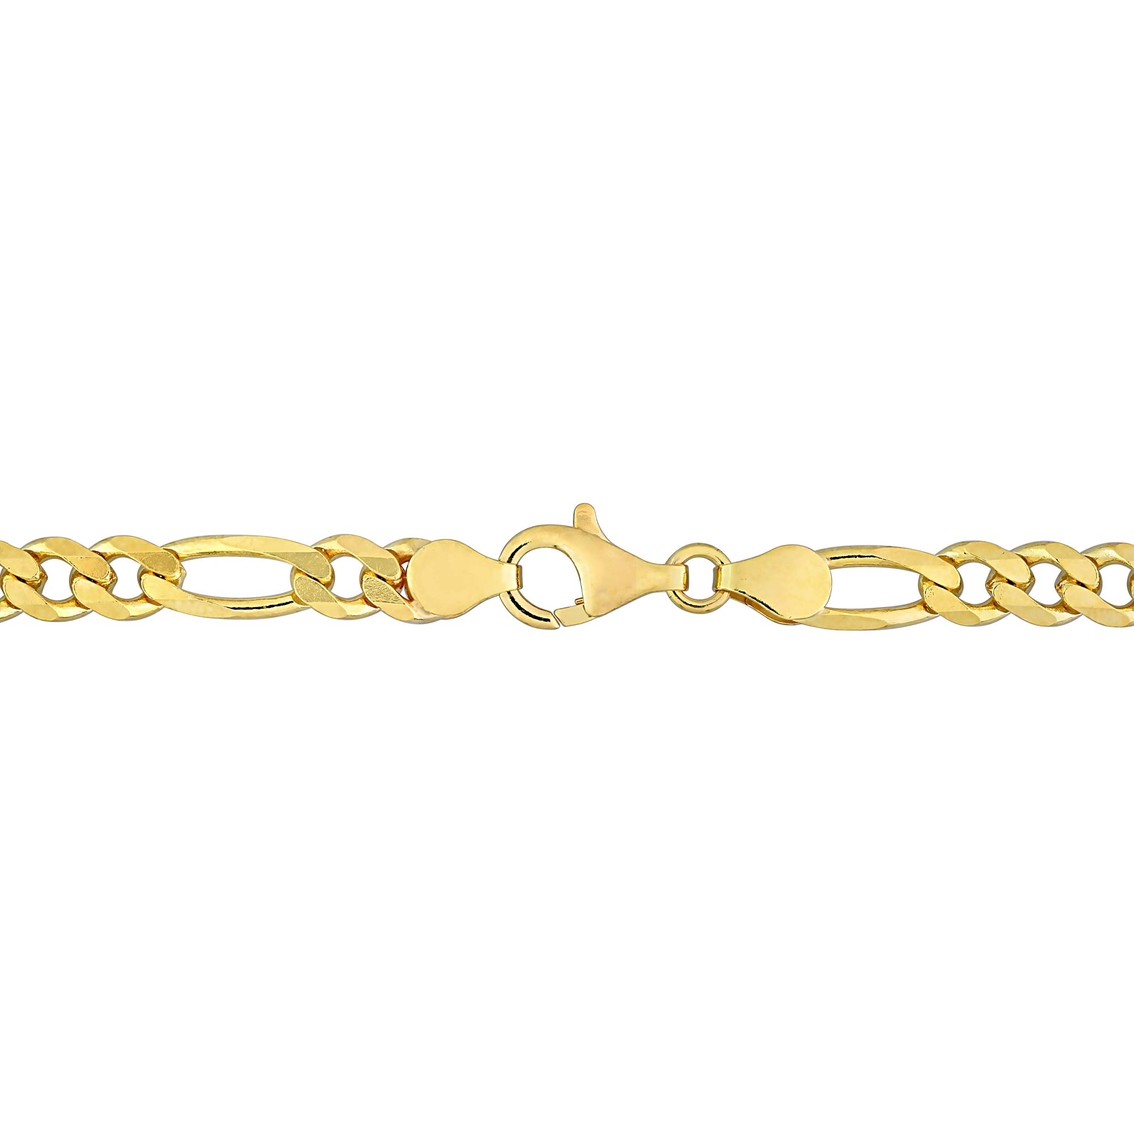 Sofia B. 18K Gold Over Sterling Silver 5.5mm Figaro Chain Necklace - Image 2 of 4